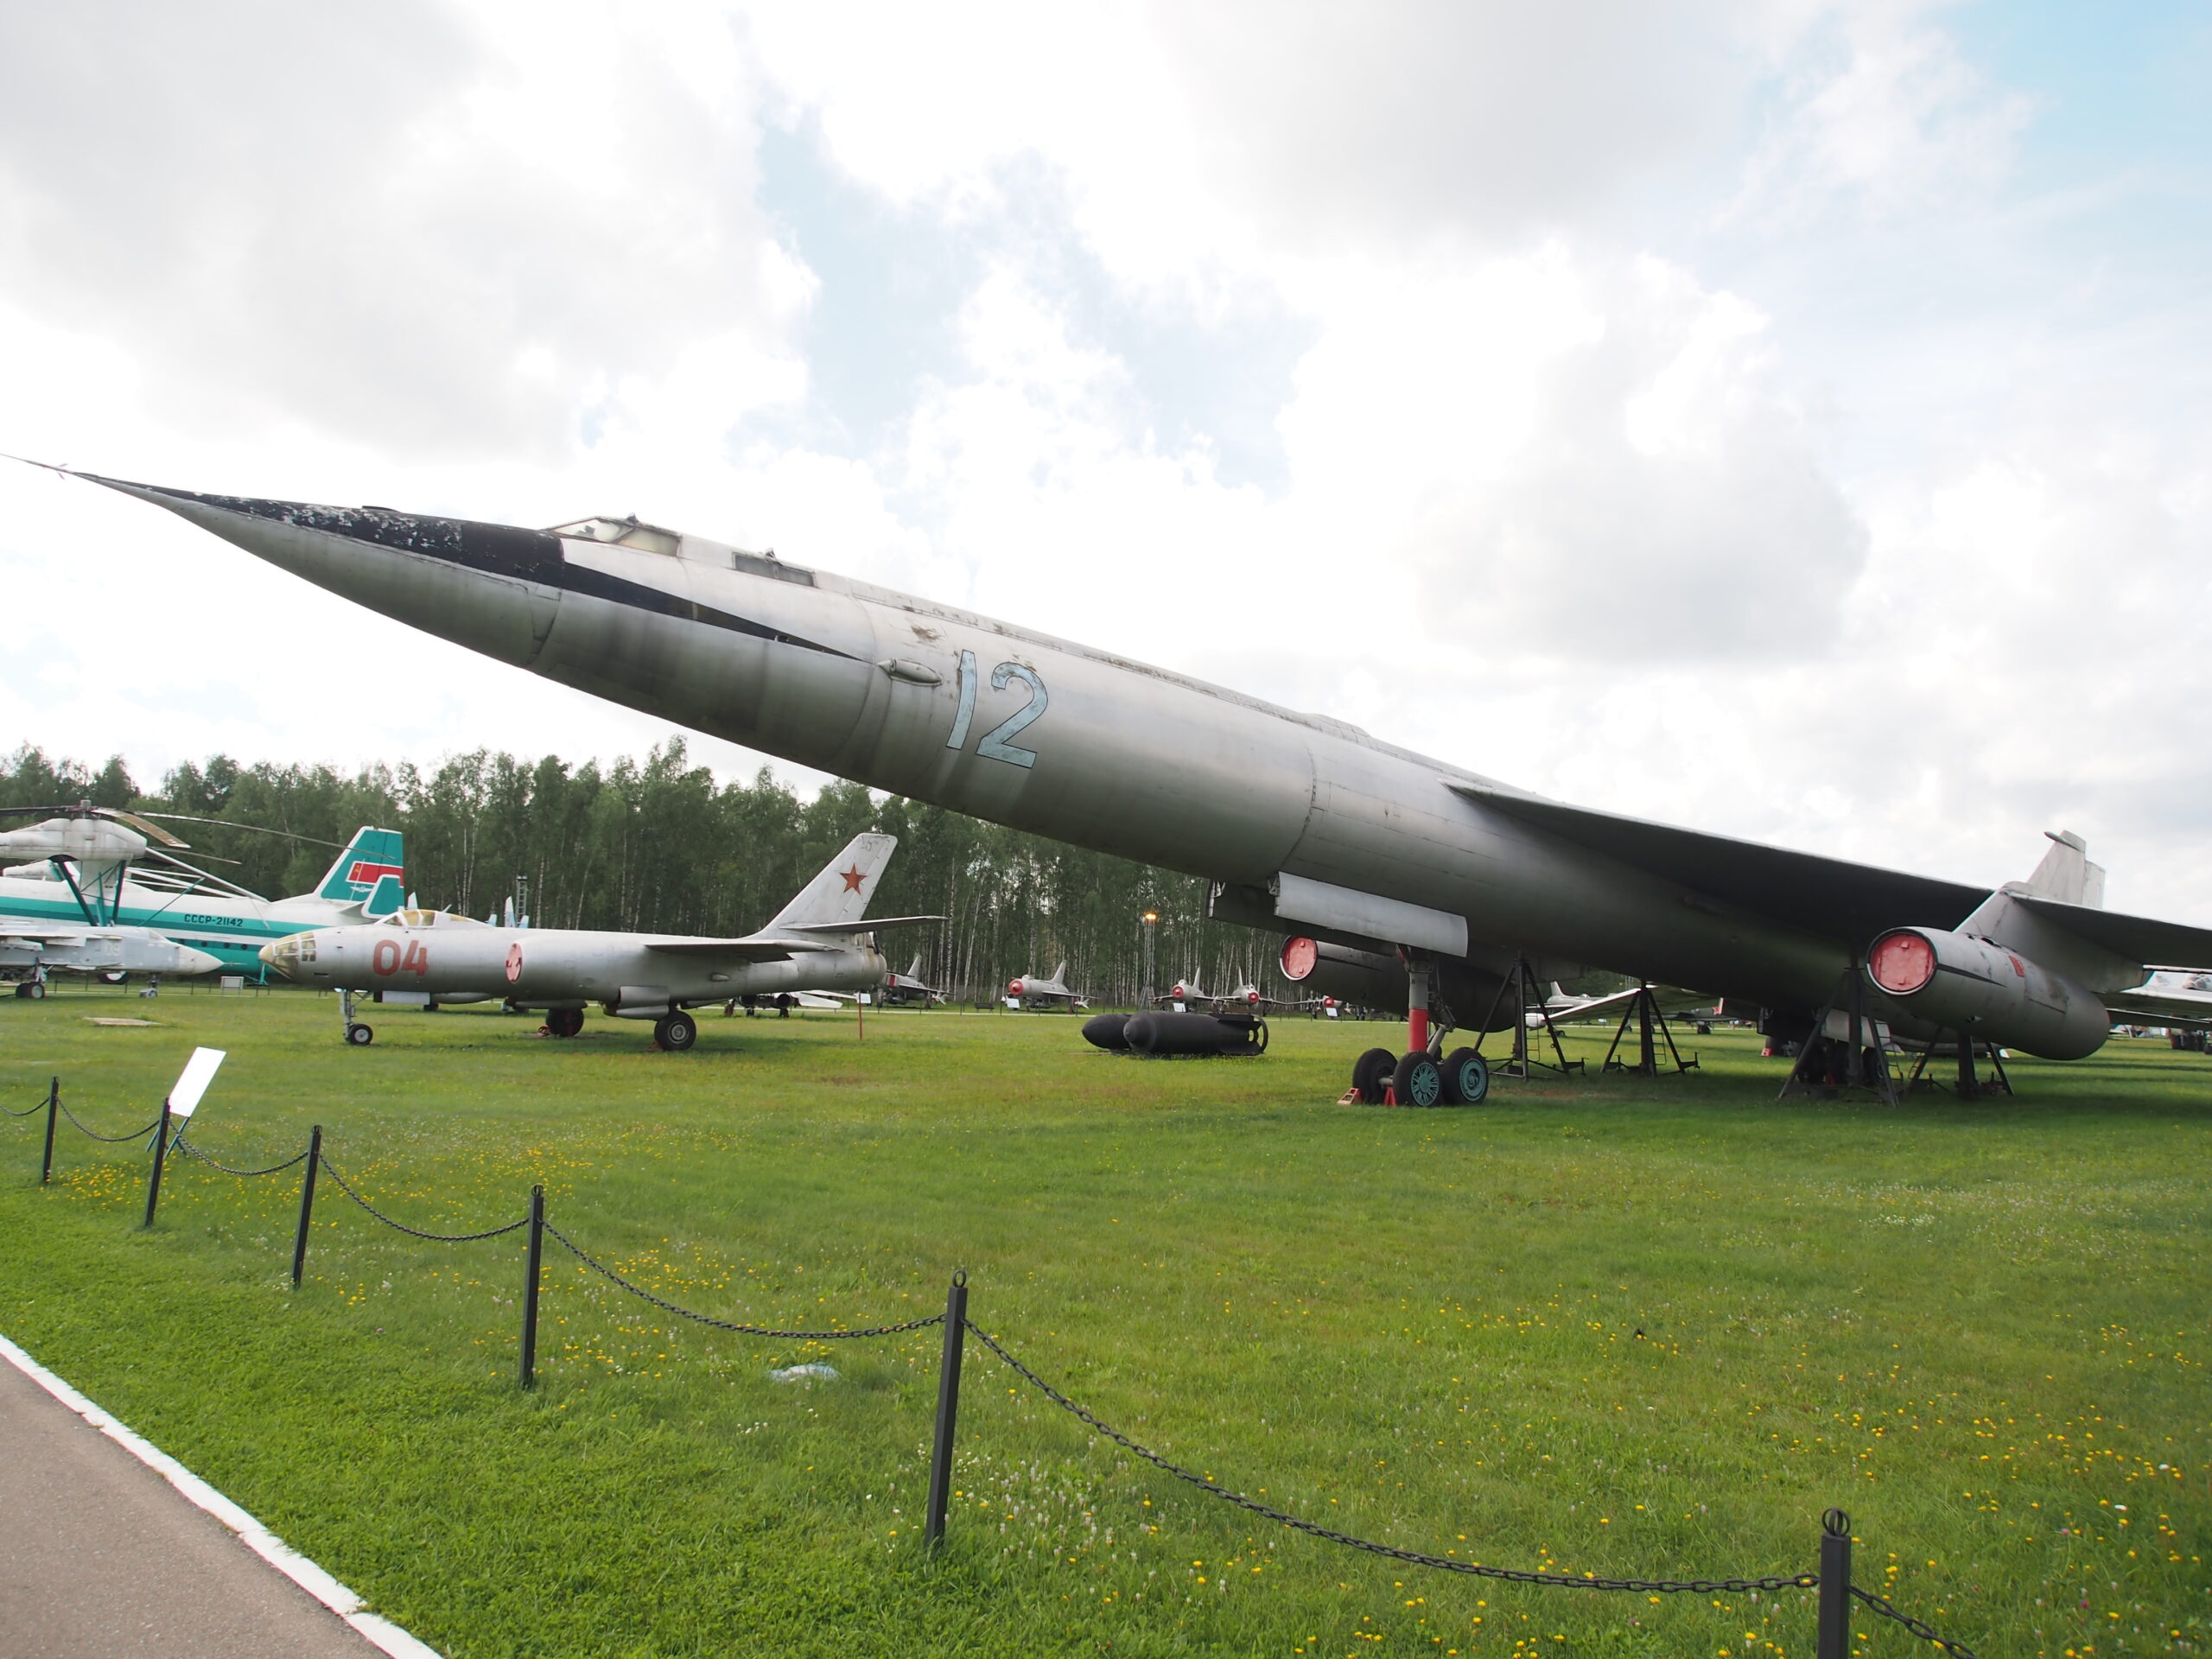 M-50 Bounder at the Russian Air Force Museum. Monino, Russia.